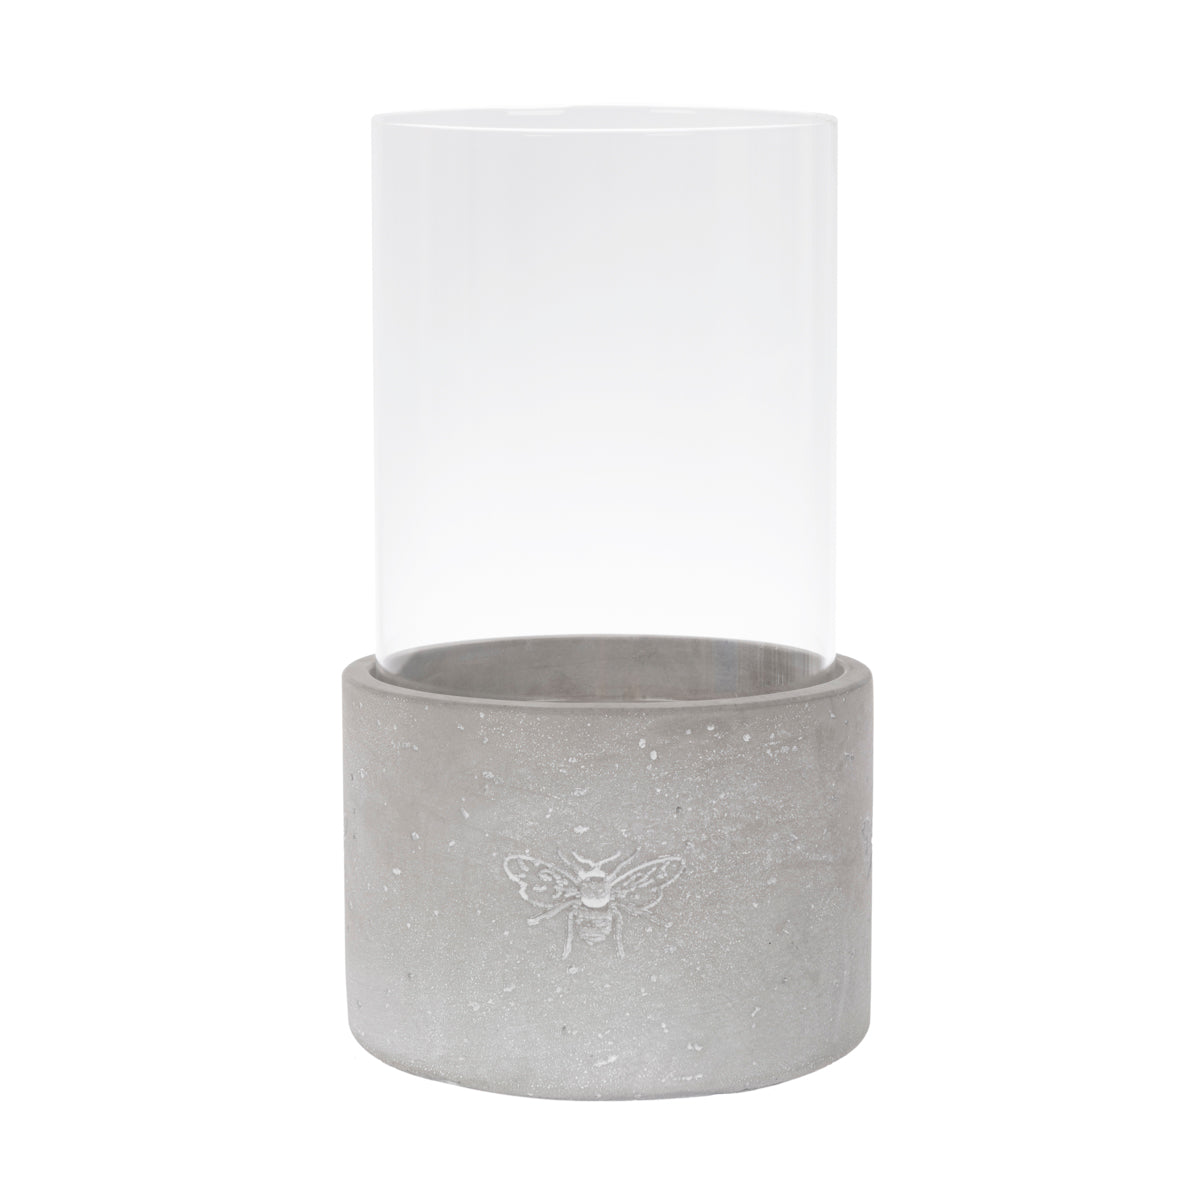 Bees Candle Holder Large by Sophie Allport